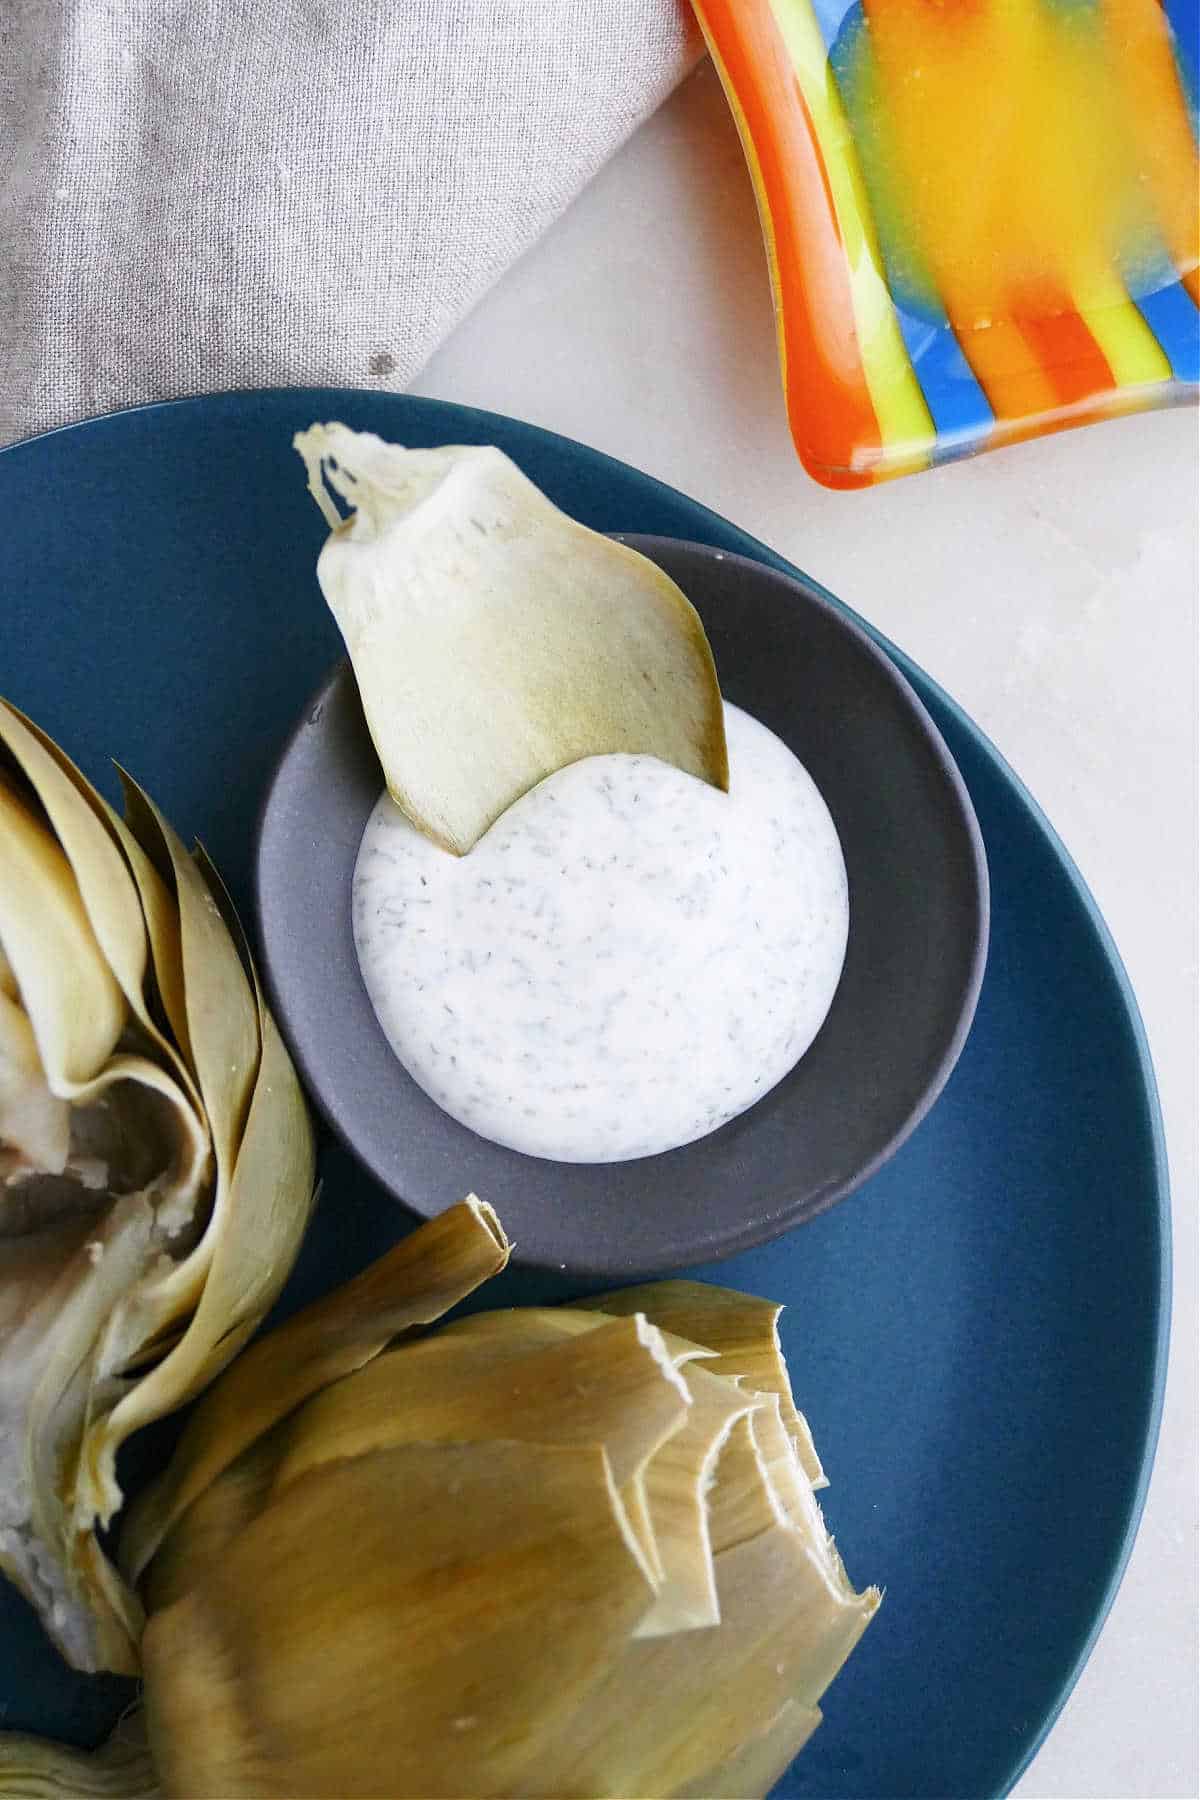 image of an artichoke leaf being dipping into a yogurt sauce on a plate